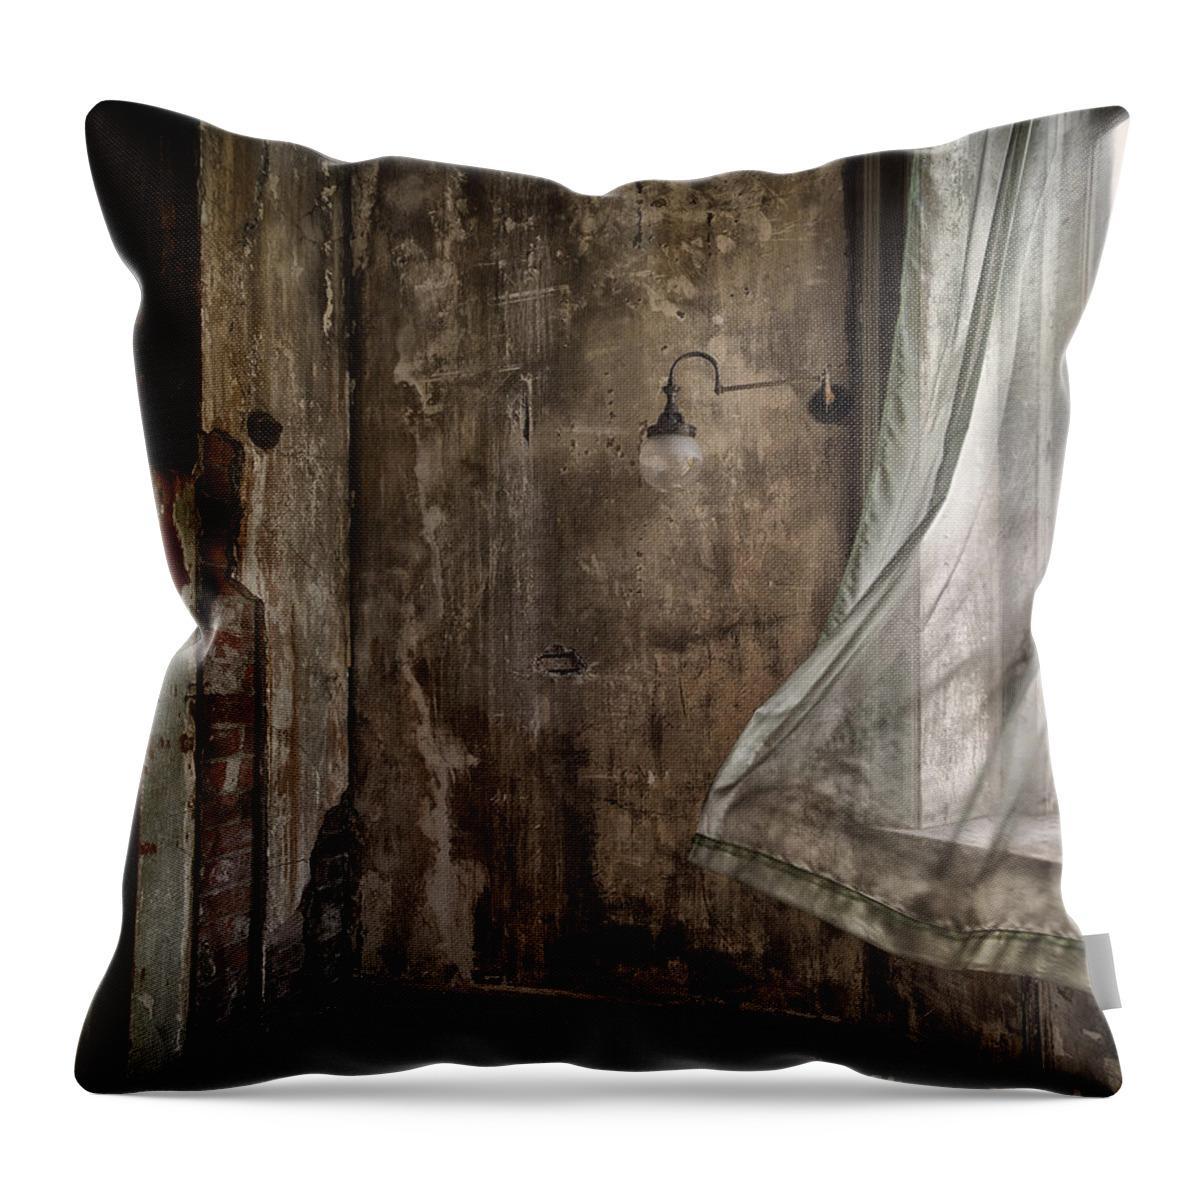 Abandoned Throw Pillow featuring the photograph Summer Breeze by Phil Pantano